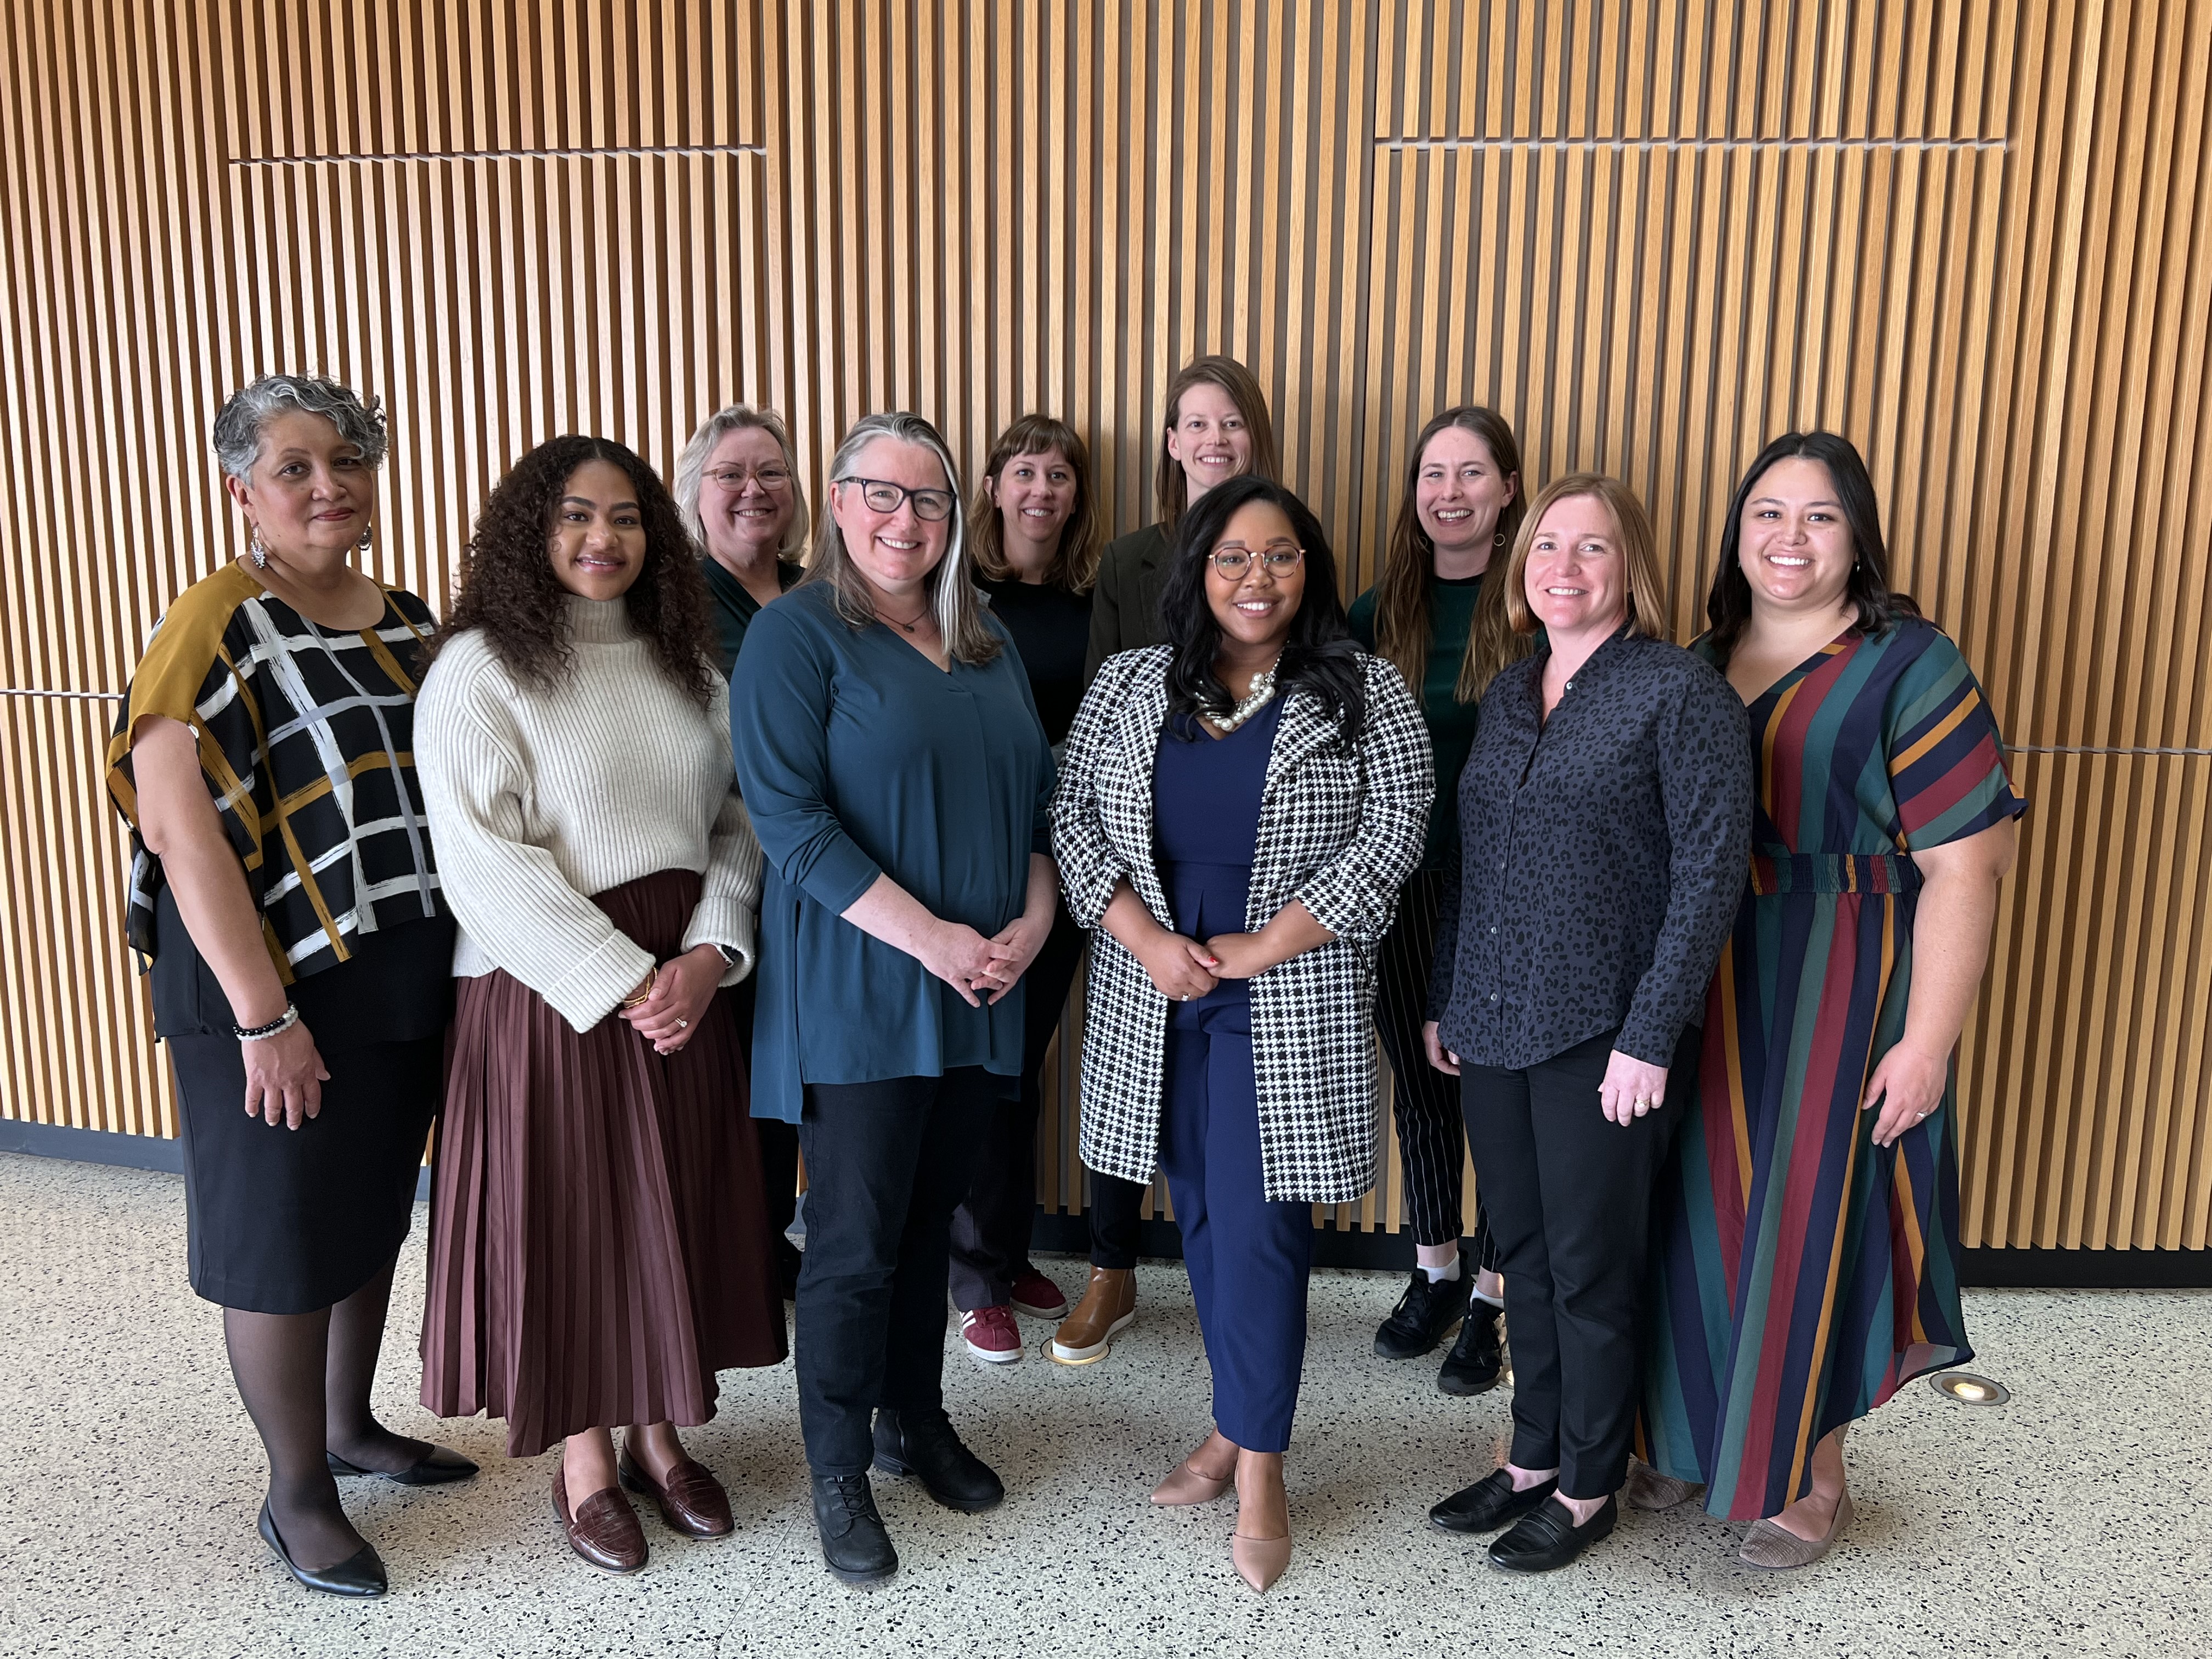 The MCC community outreach and engagement team poses in front of an oak-colored wood panel wall on the UMN Twin Cities campus. There are 10 women in the photo, standing with hands clasped or at their sides.